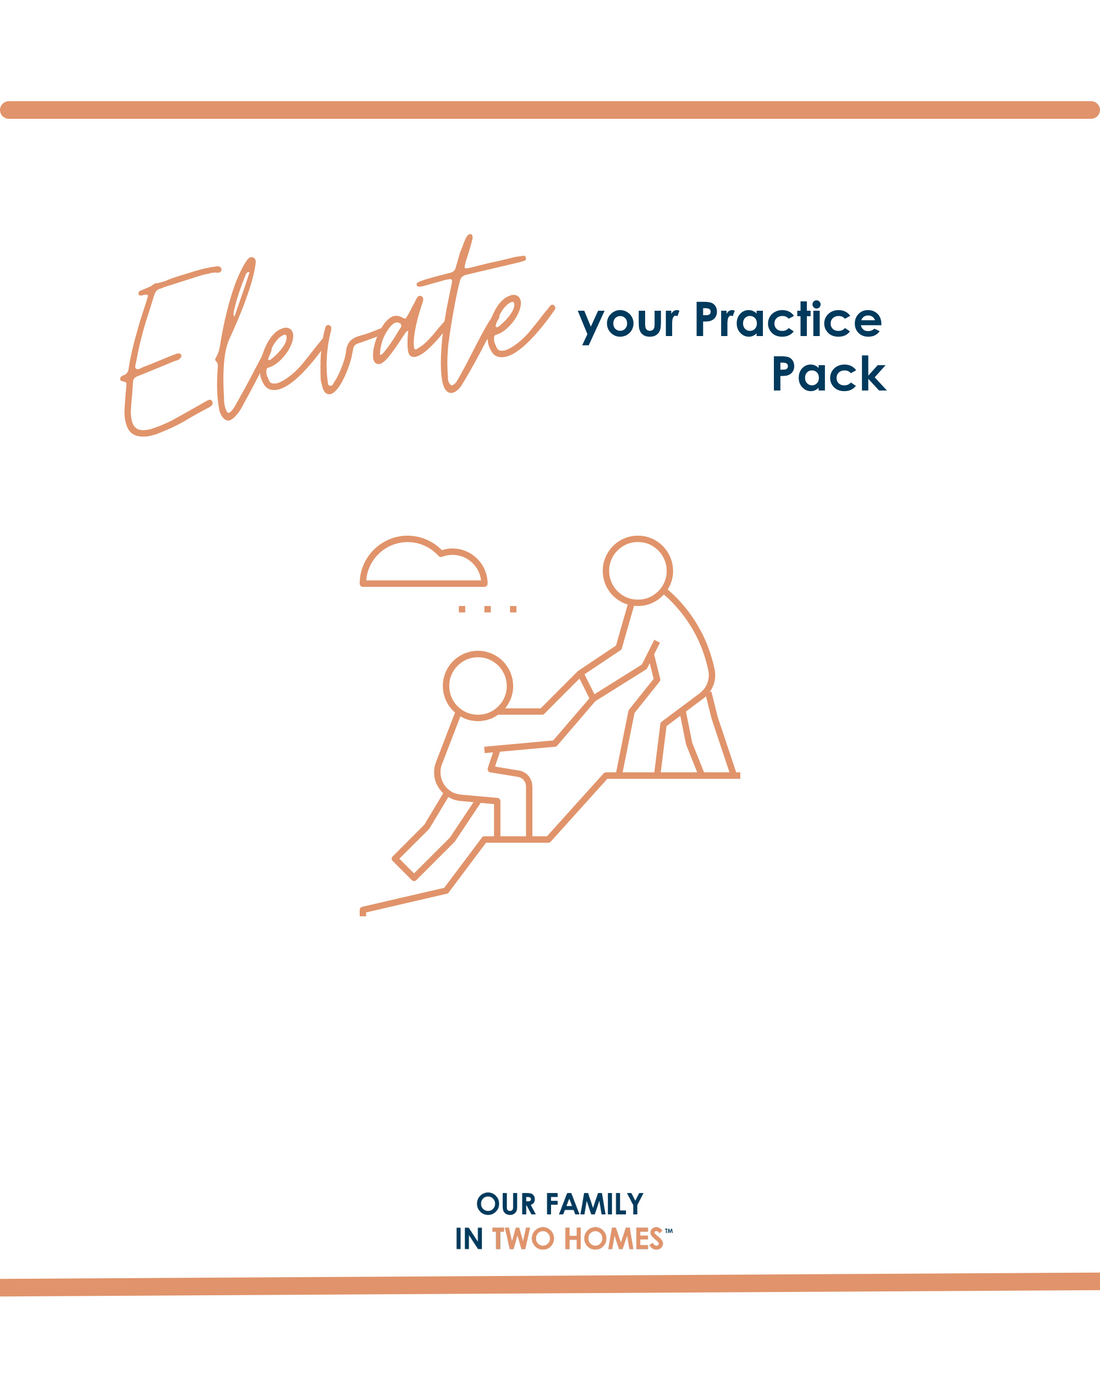 Elevate Your Practice Pack: a Personalized 60-Minute Coaching Session